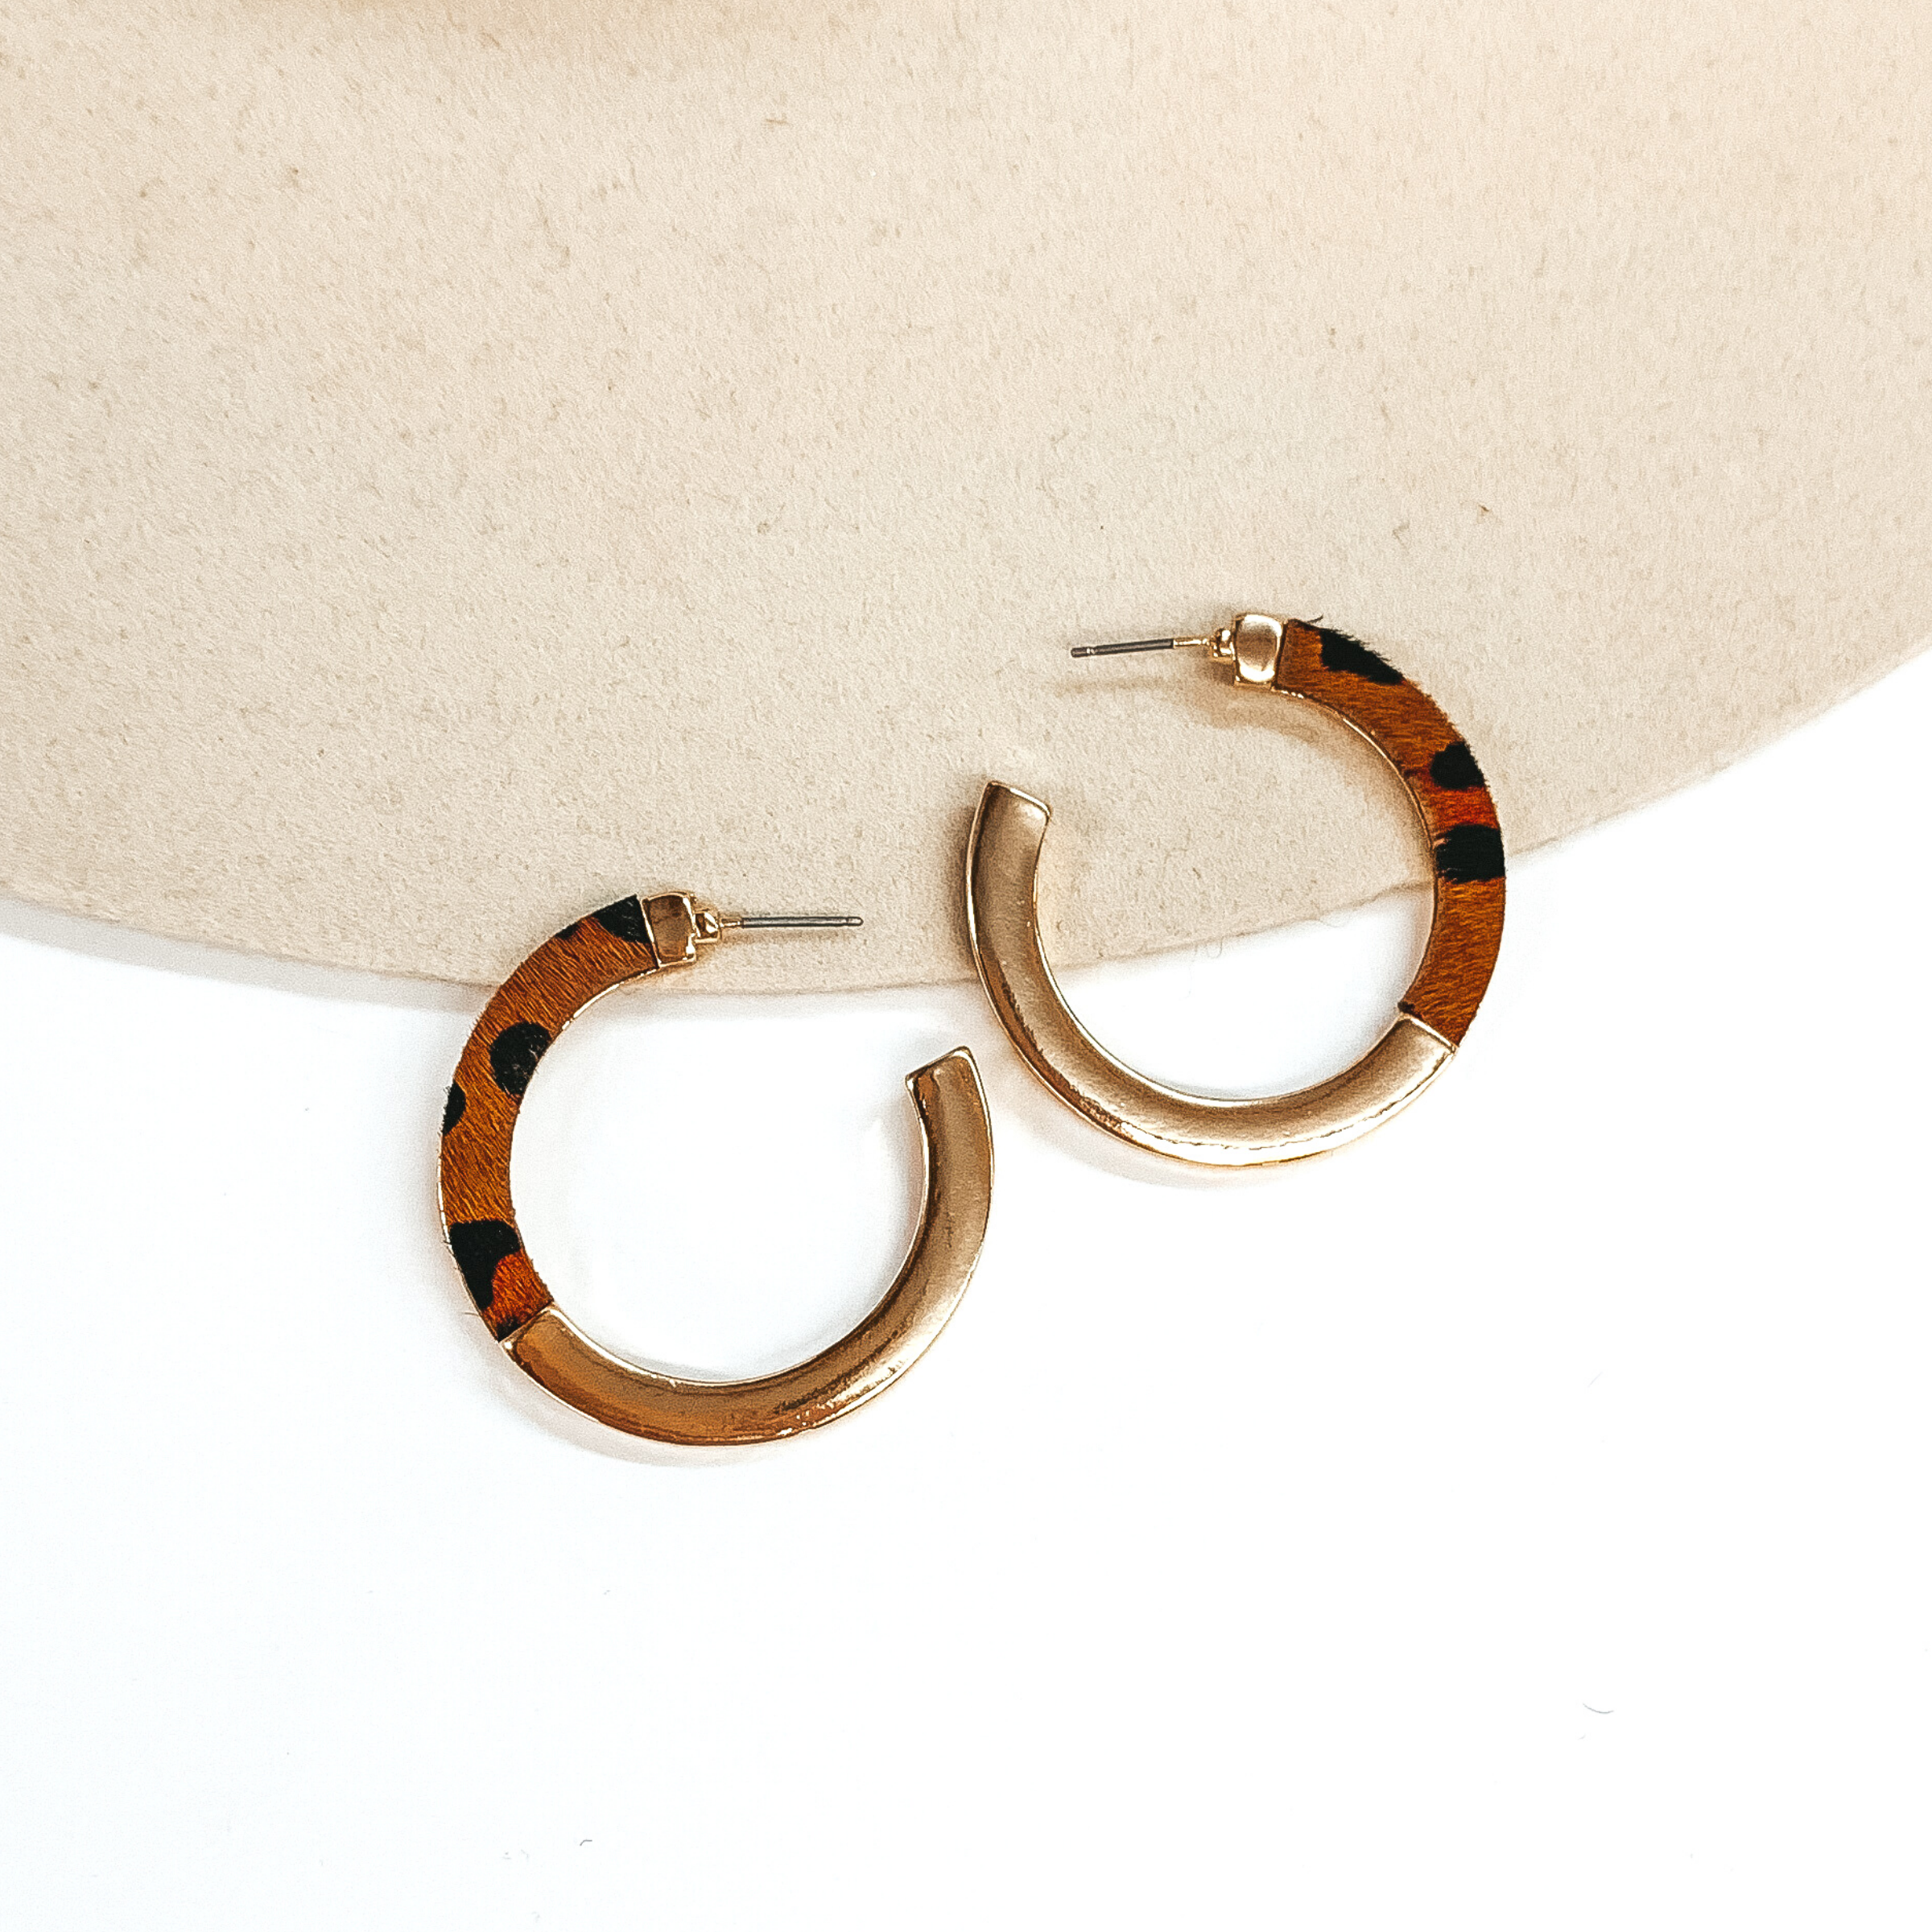  Flat hoops that are half gold and half brown with a black leopard print. These earrings are pictured on a white and beige background.